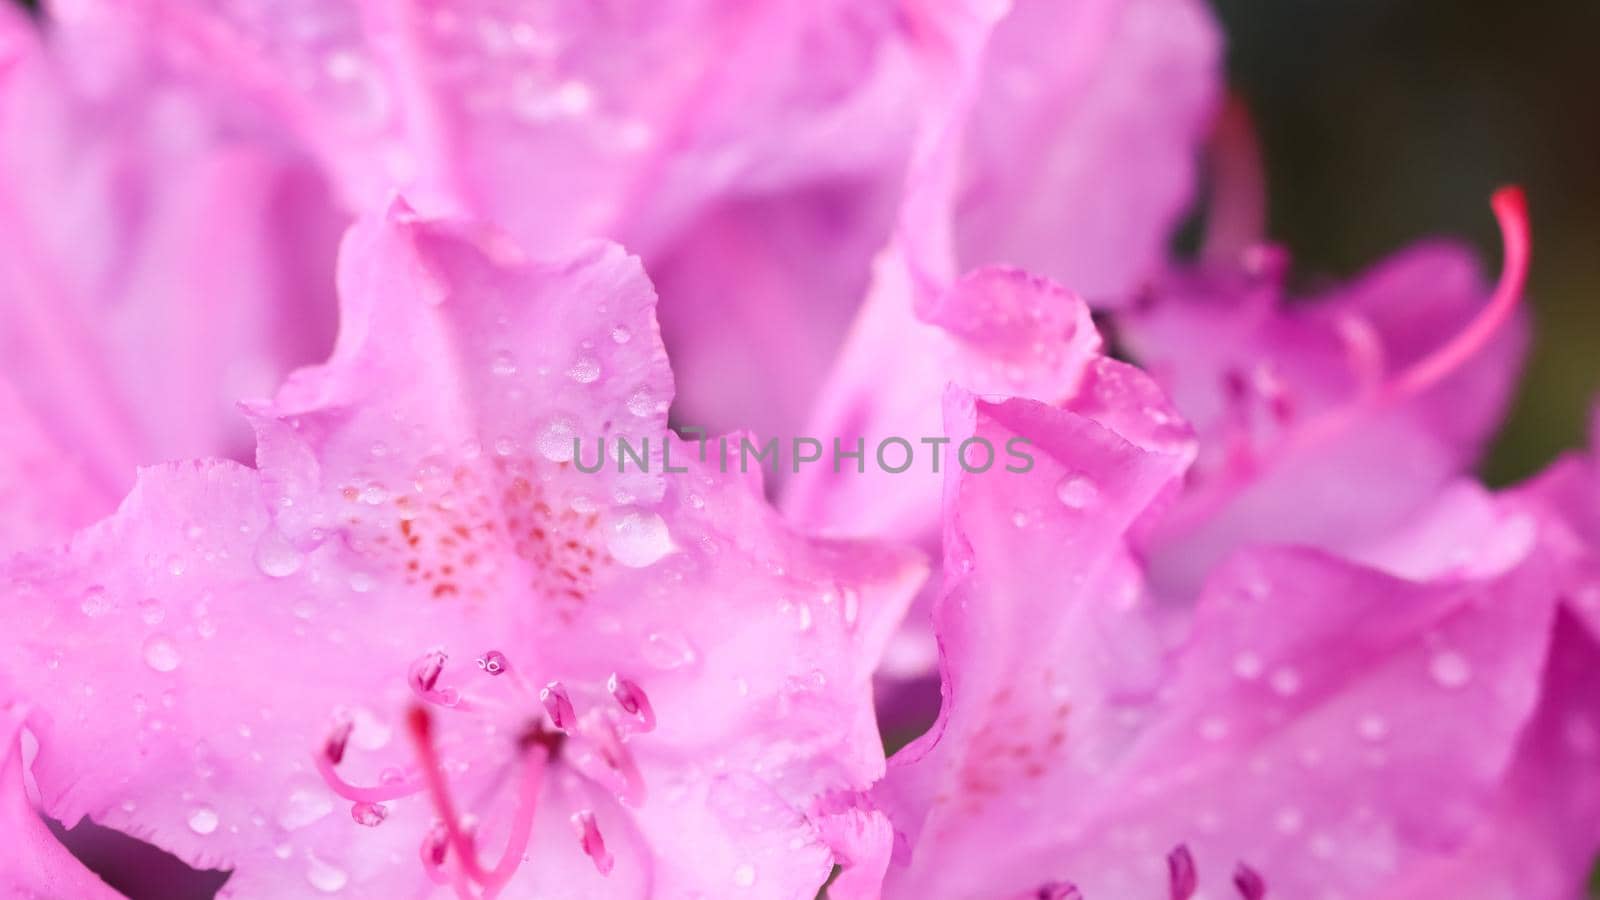 Botanical concept - Soft focus, abstract floral background, pink Rhododendron flower petals with dew drops. Macro flowers backdrop for holiday brand design